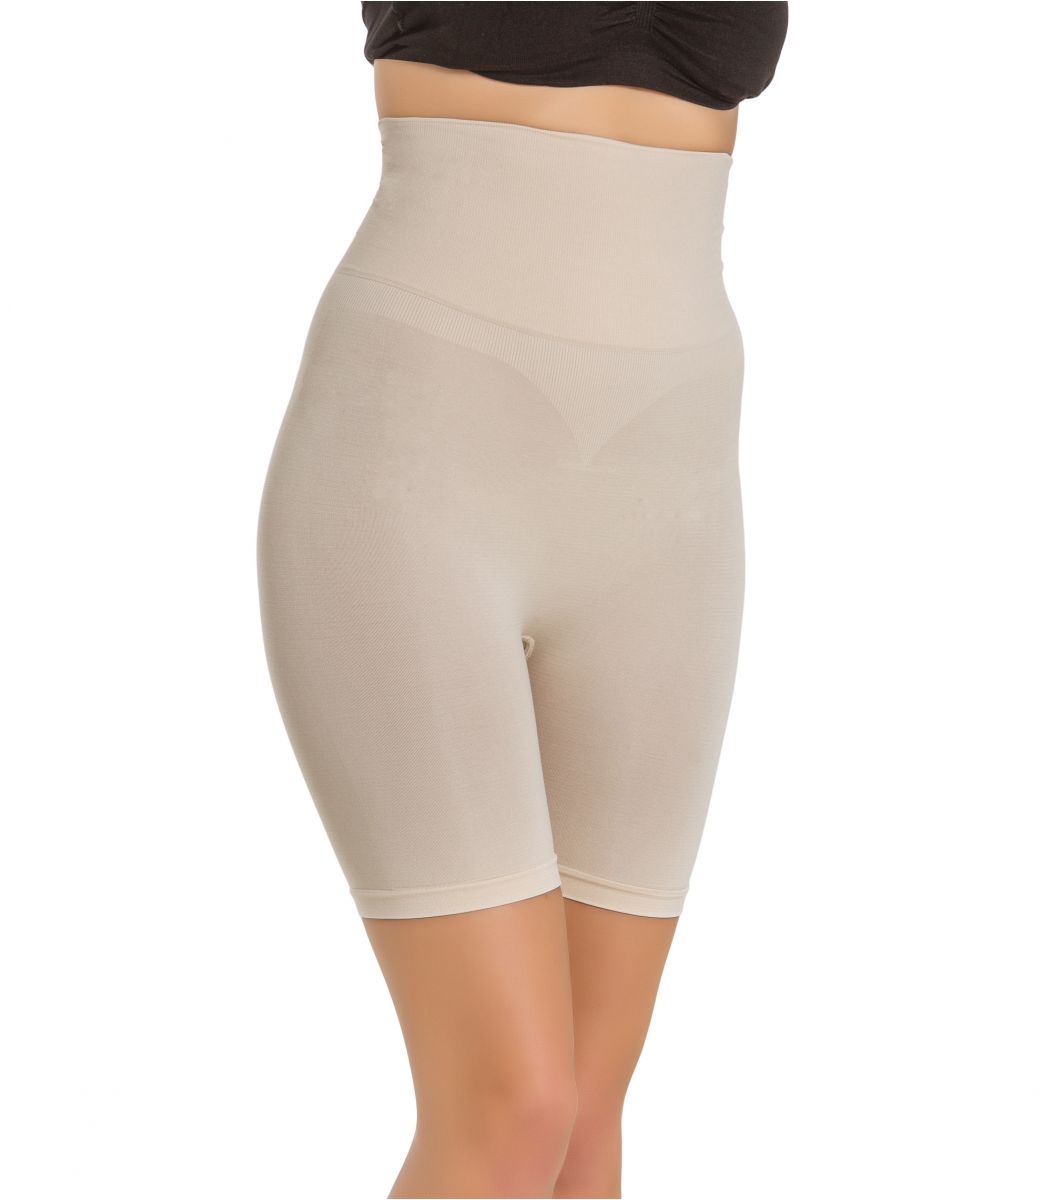  Boxer Lord Γυναικείο Boxer σύσφιξης seamless {PRODUCT_REFERENCE}-1